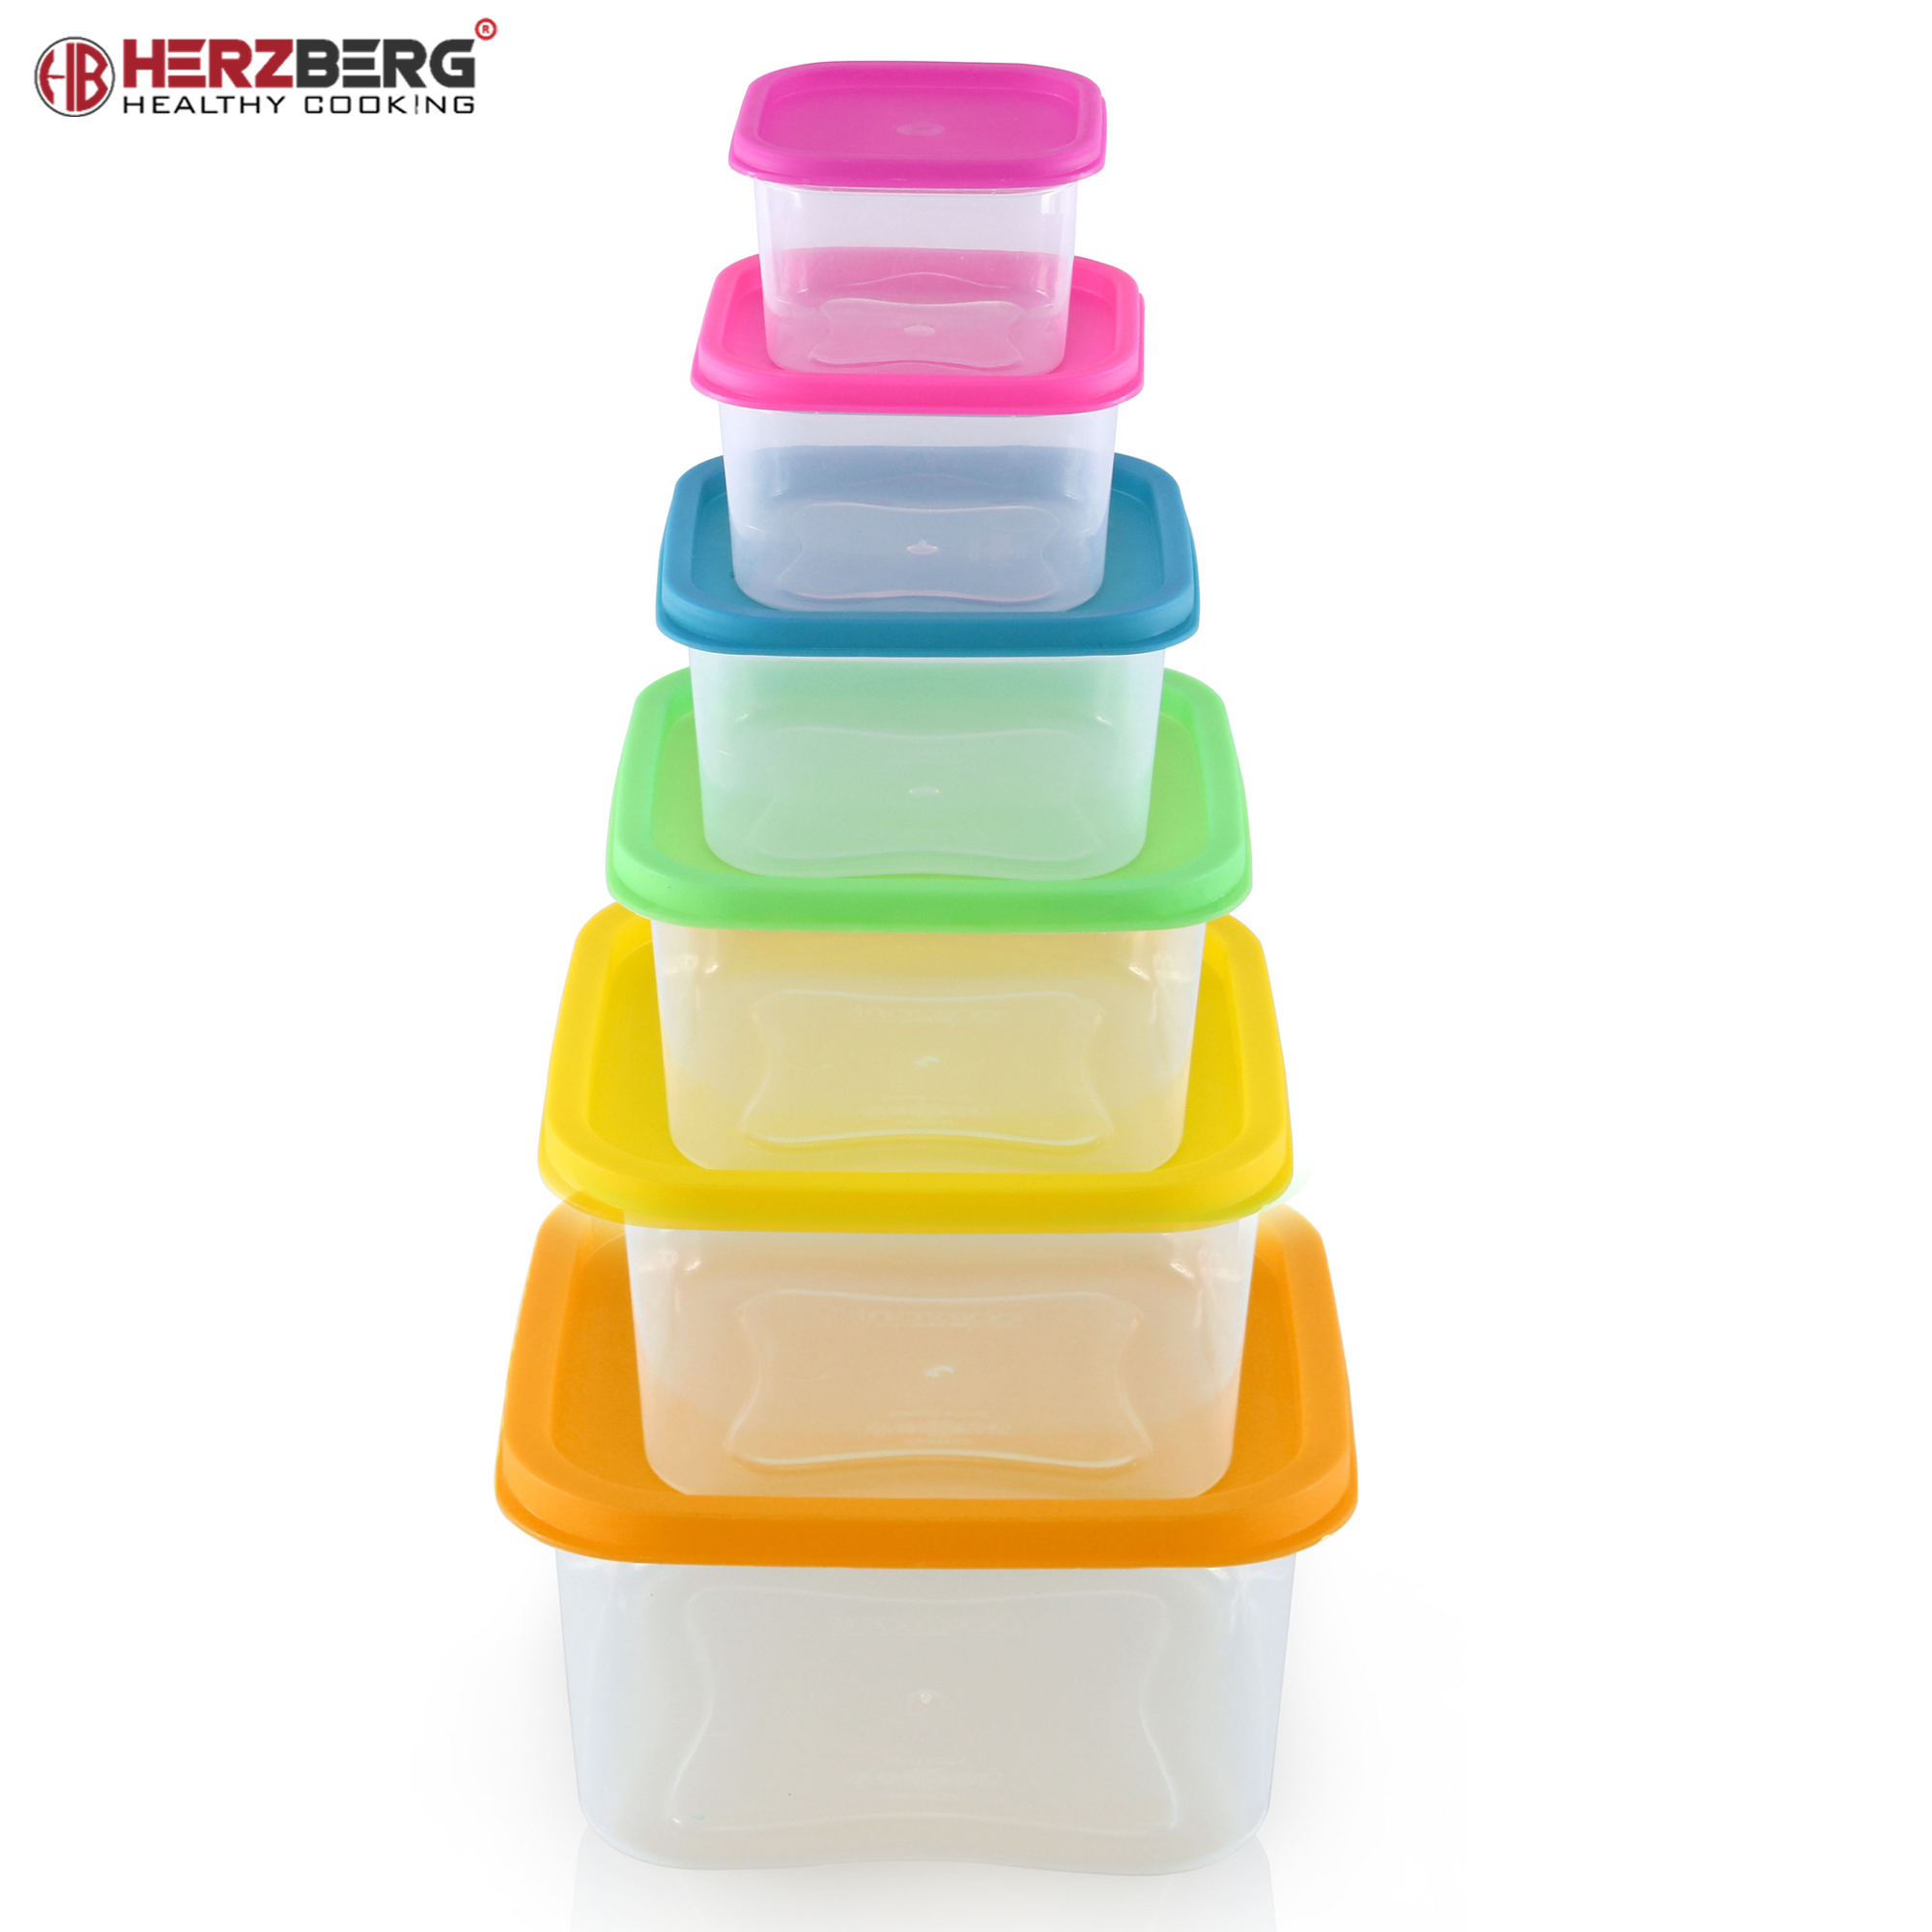 Herzberg 6-in-1 Square Food Storage Container Set